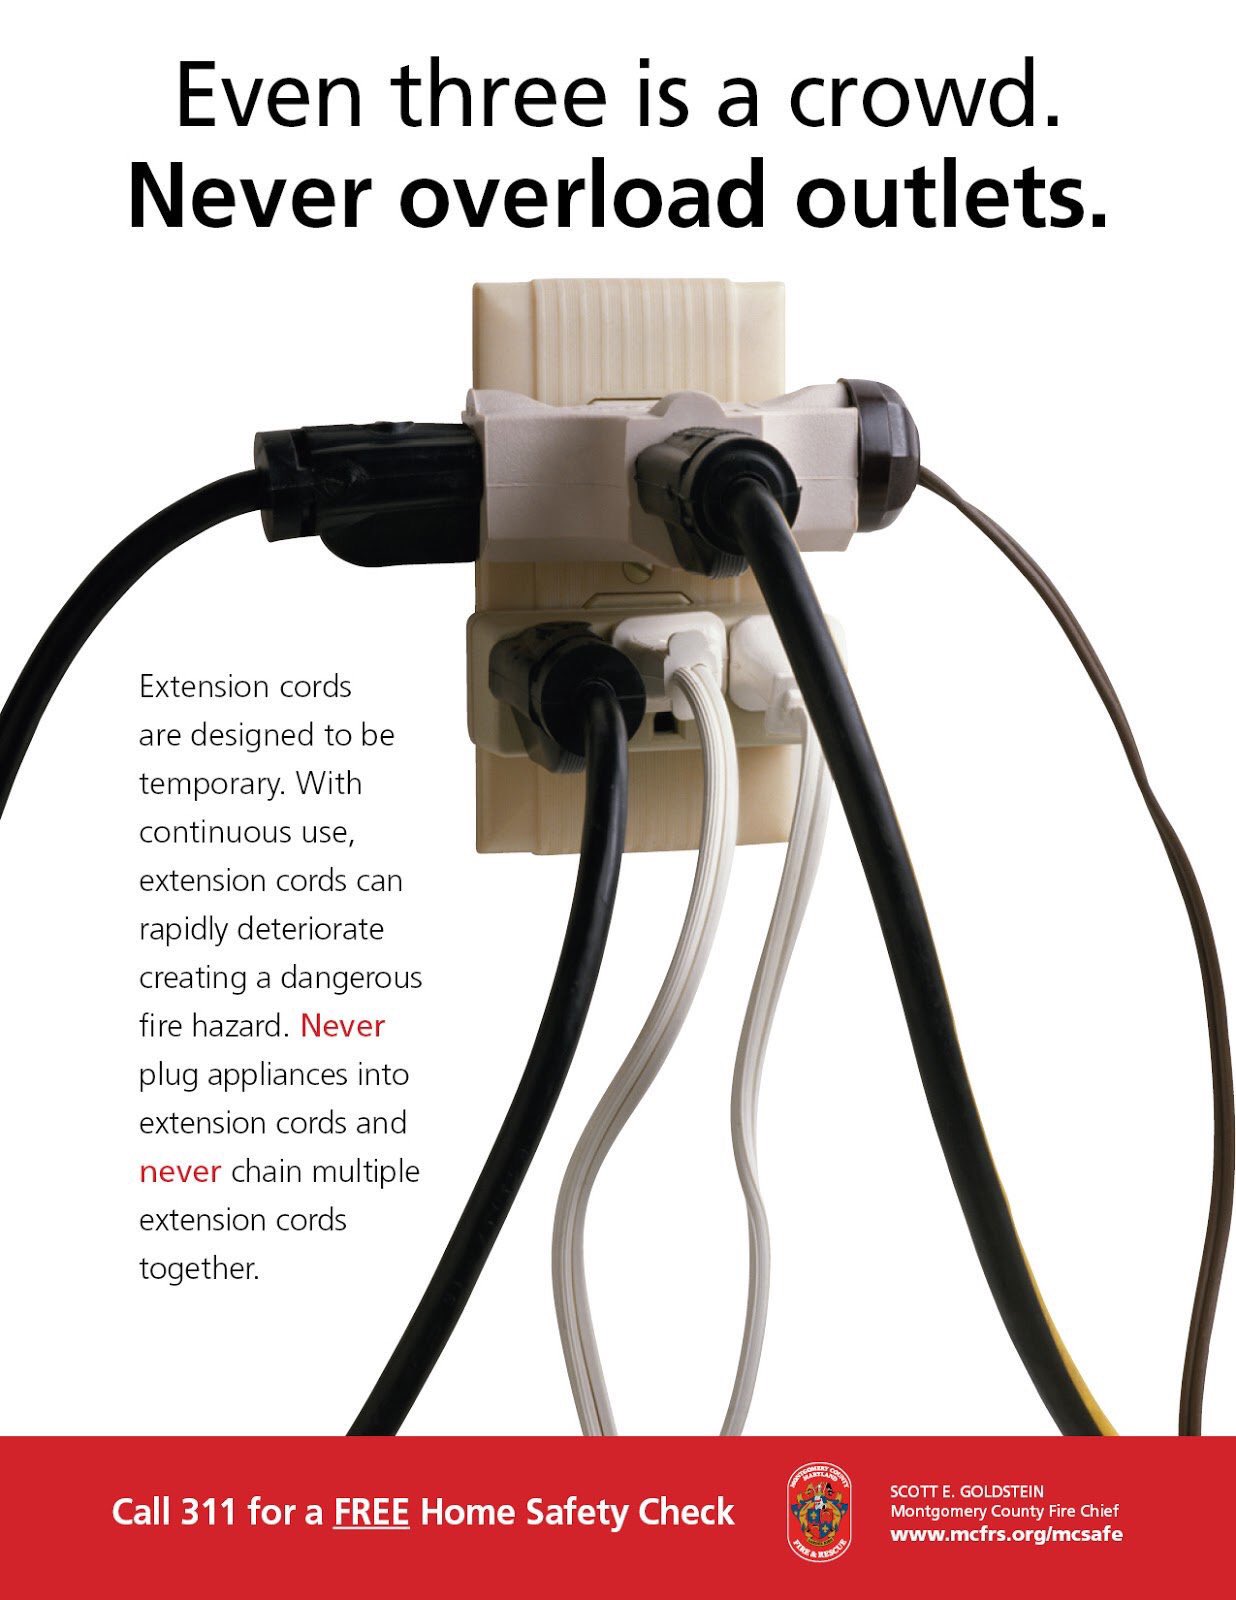 Pete Piringer on X: Overloaded outlets can cause overheating/fire hazard. Extension  cords are intended as temporary wiring solutions. If you find you're using  them on a permanent basis, consider updating your home's